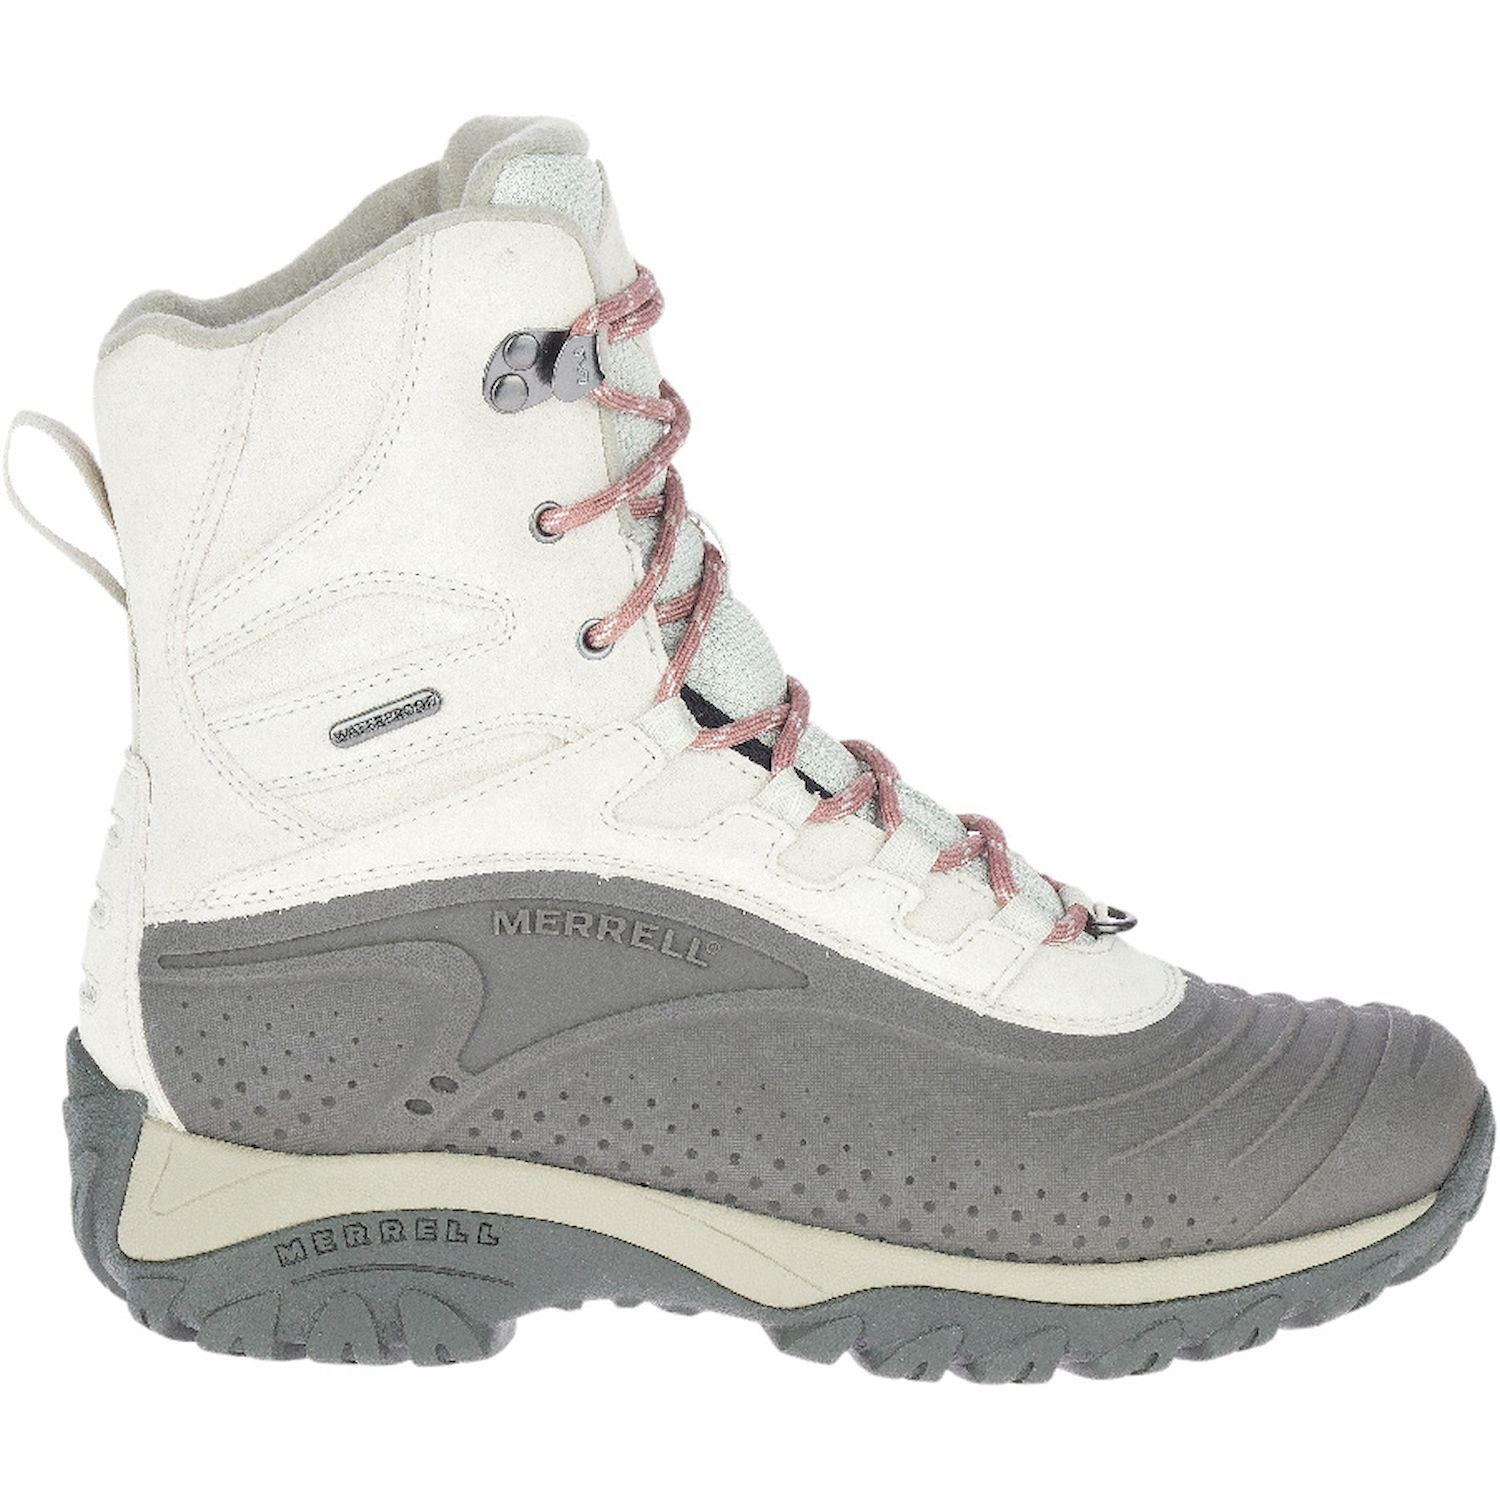 Merrell Thermo Frosty Tall Shell Wp - Winter boots - Women's